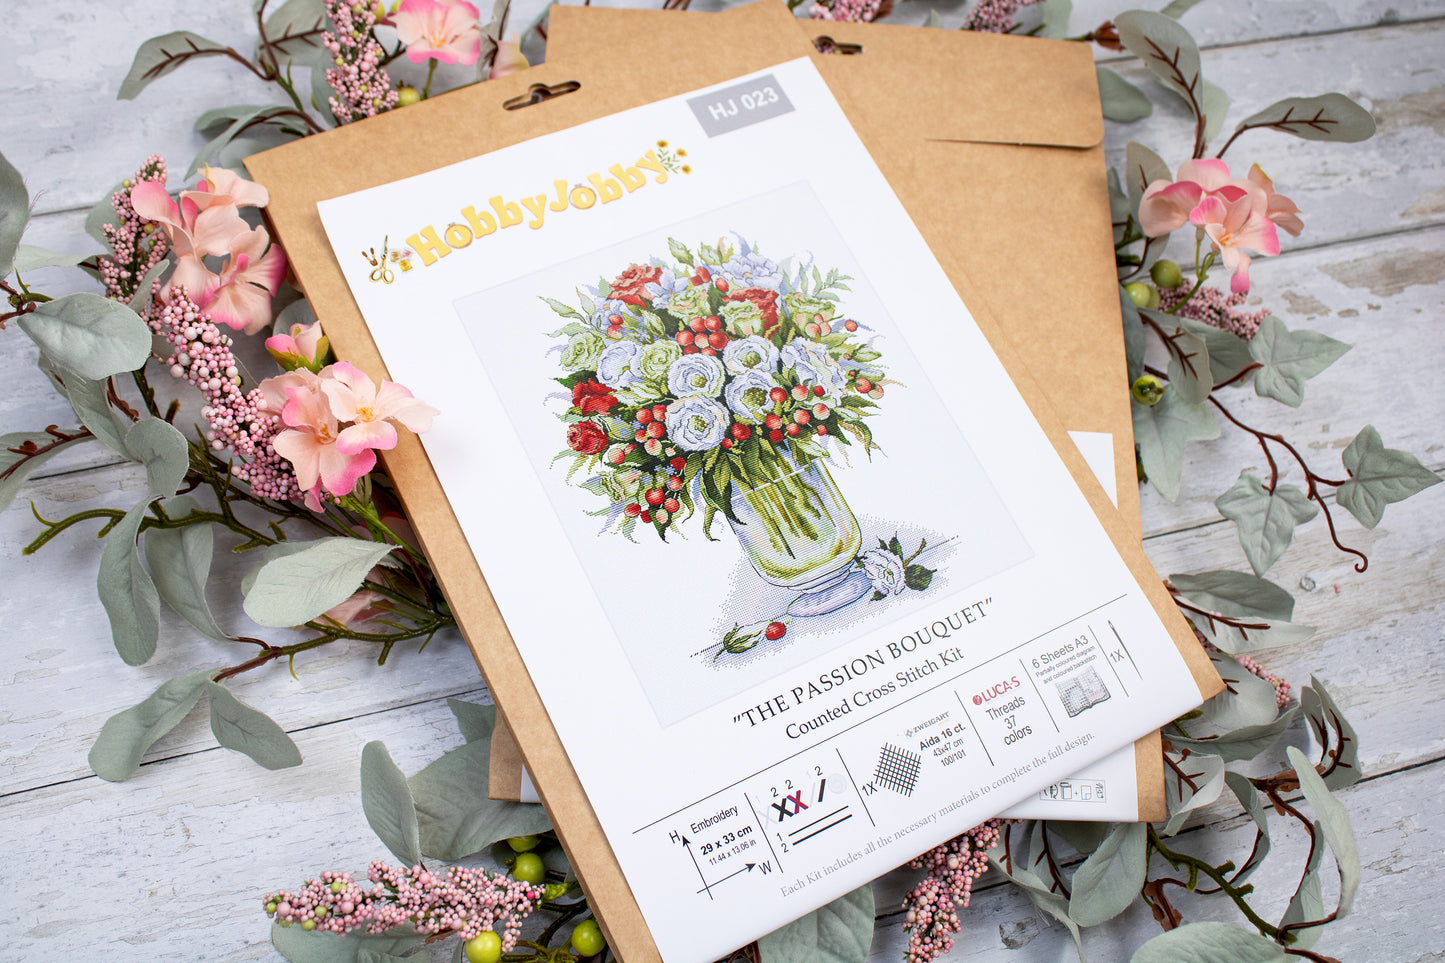 Cross Stitch Kit HobbyJobby - The Passion Bouquet